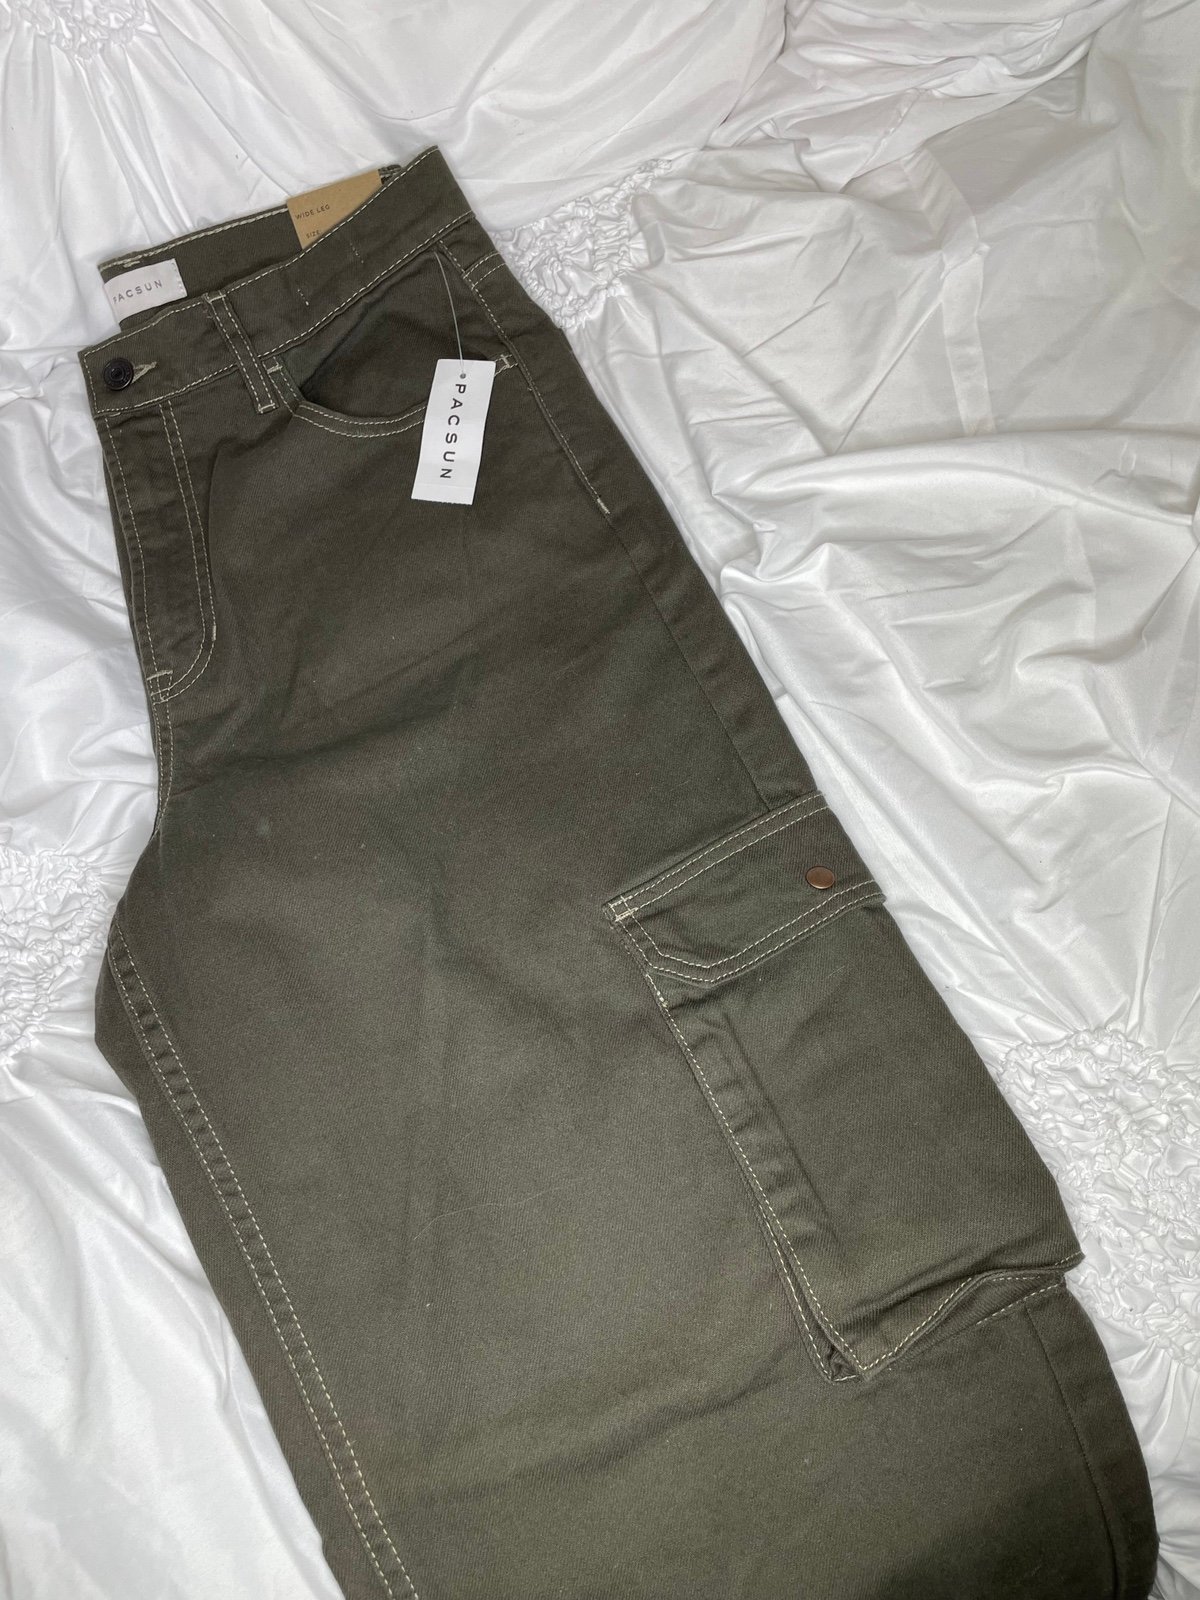 The Best Seller Green cargo pants with crème hemming PM0CX0Jhg Counter Genuine 